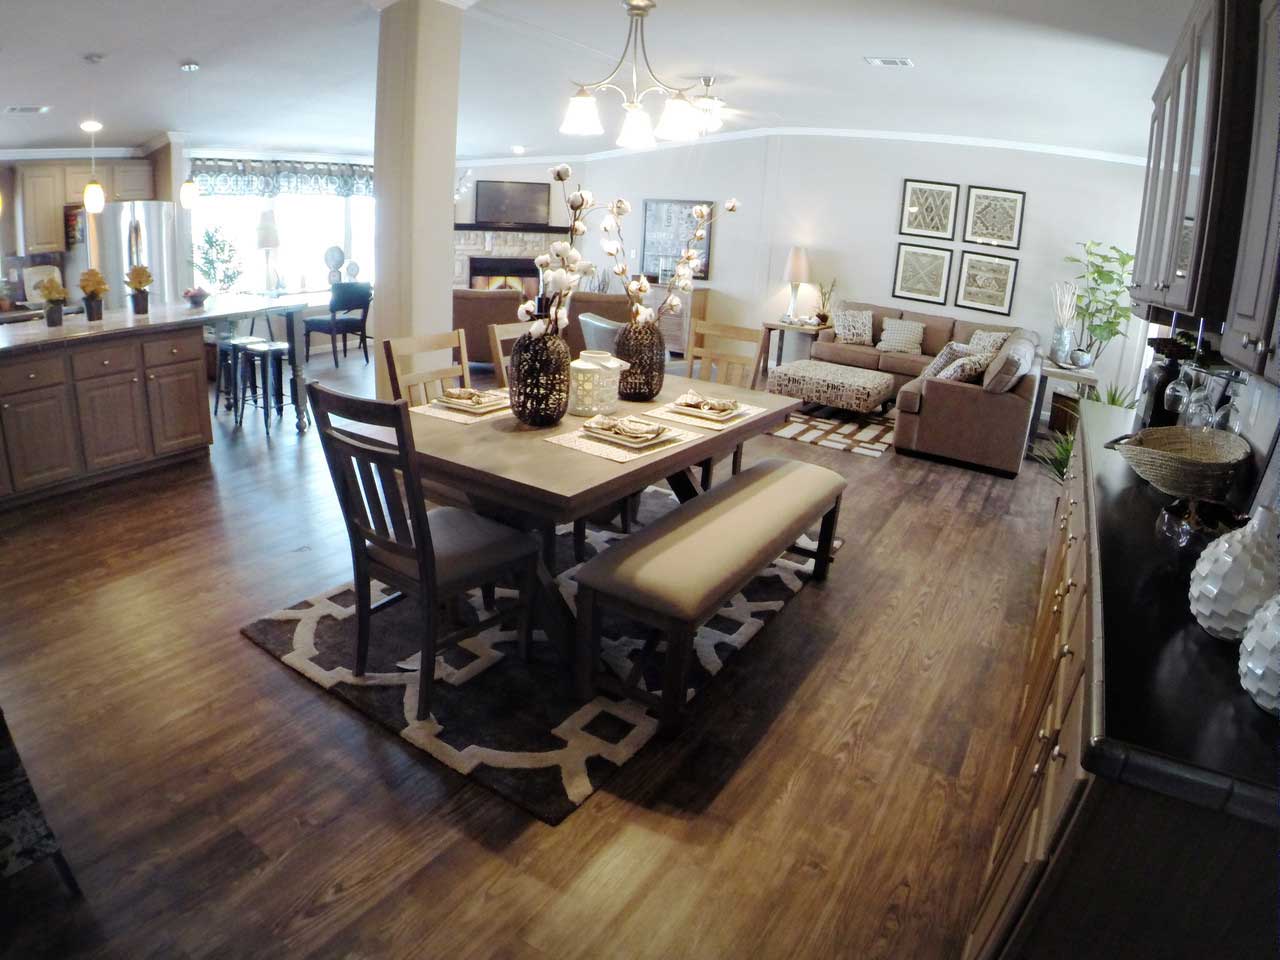 A beautifully set dining room table for six, with a cozy living room visible in the background.